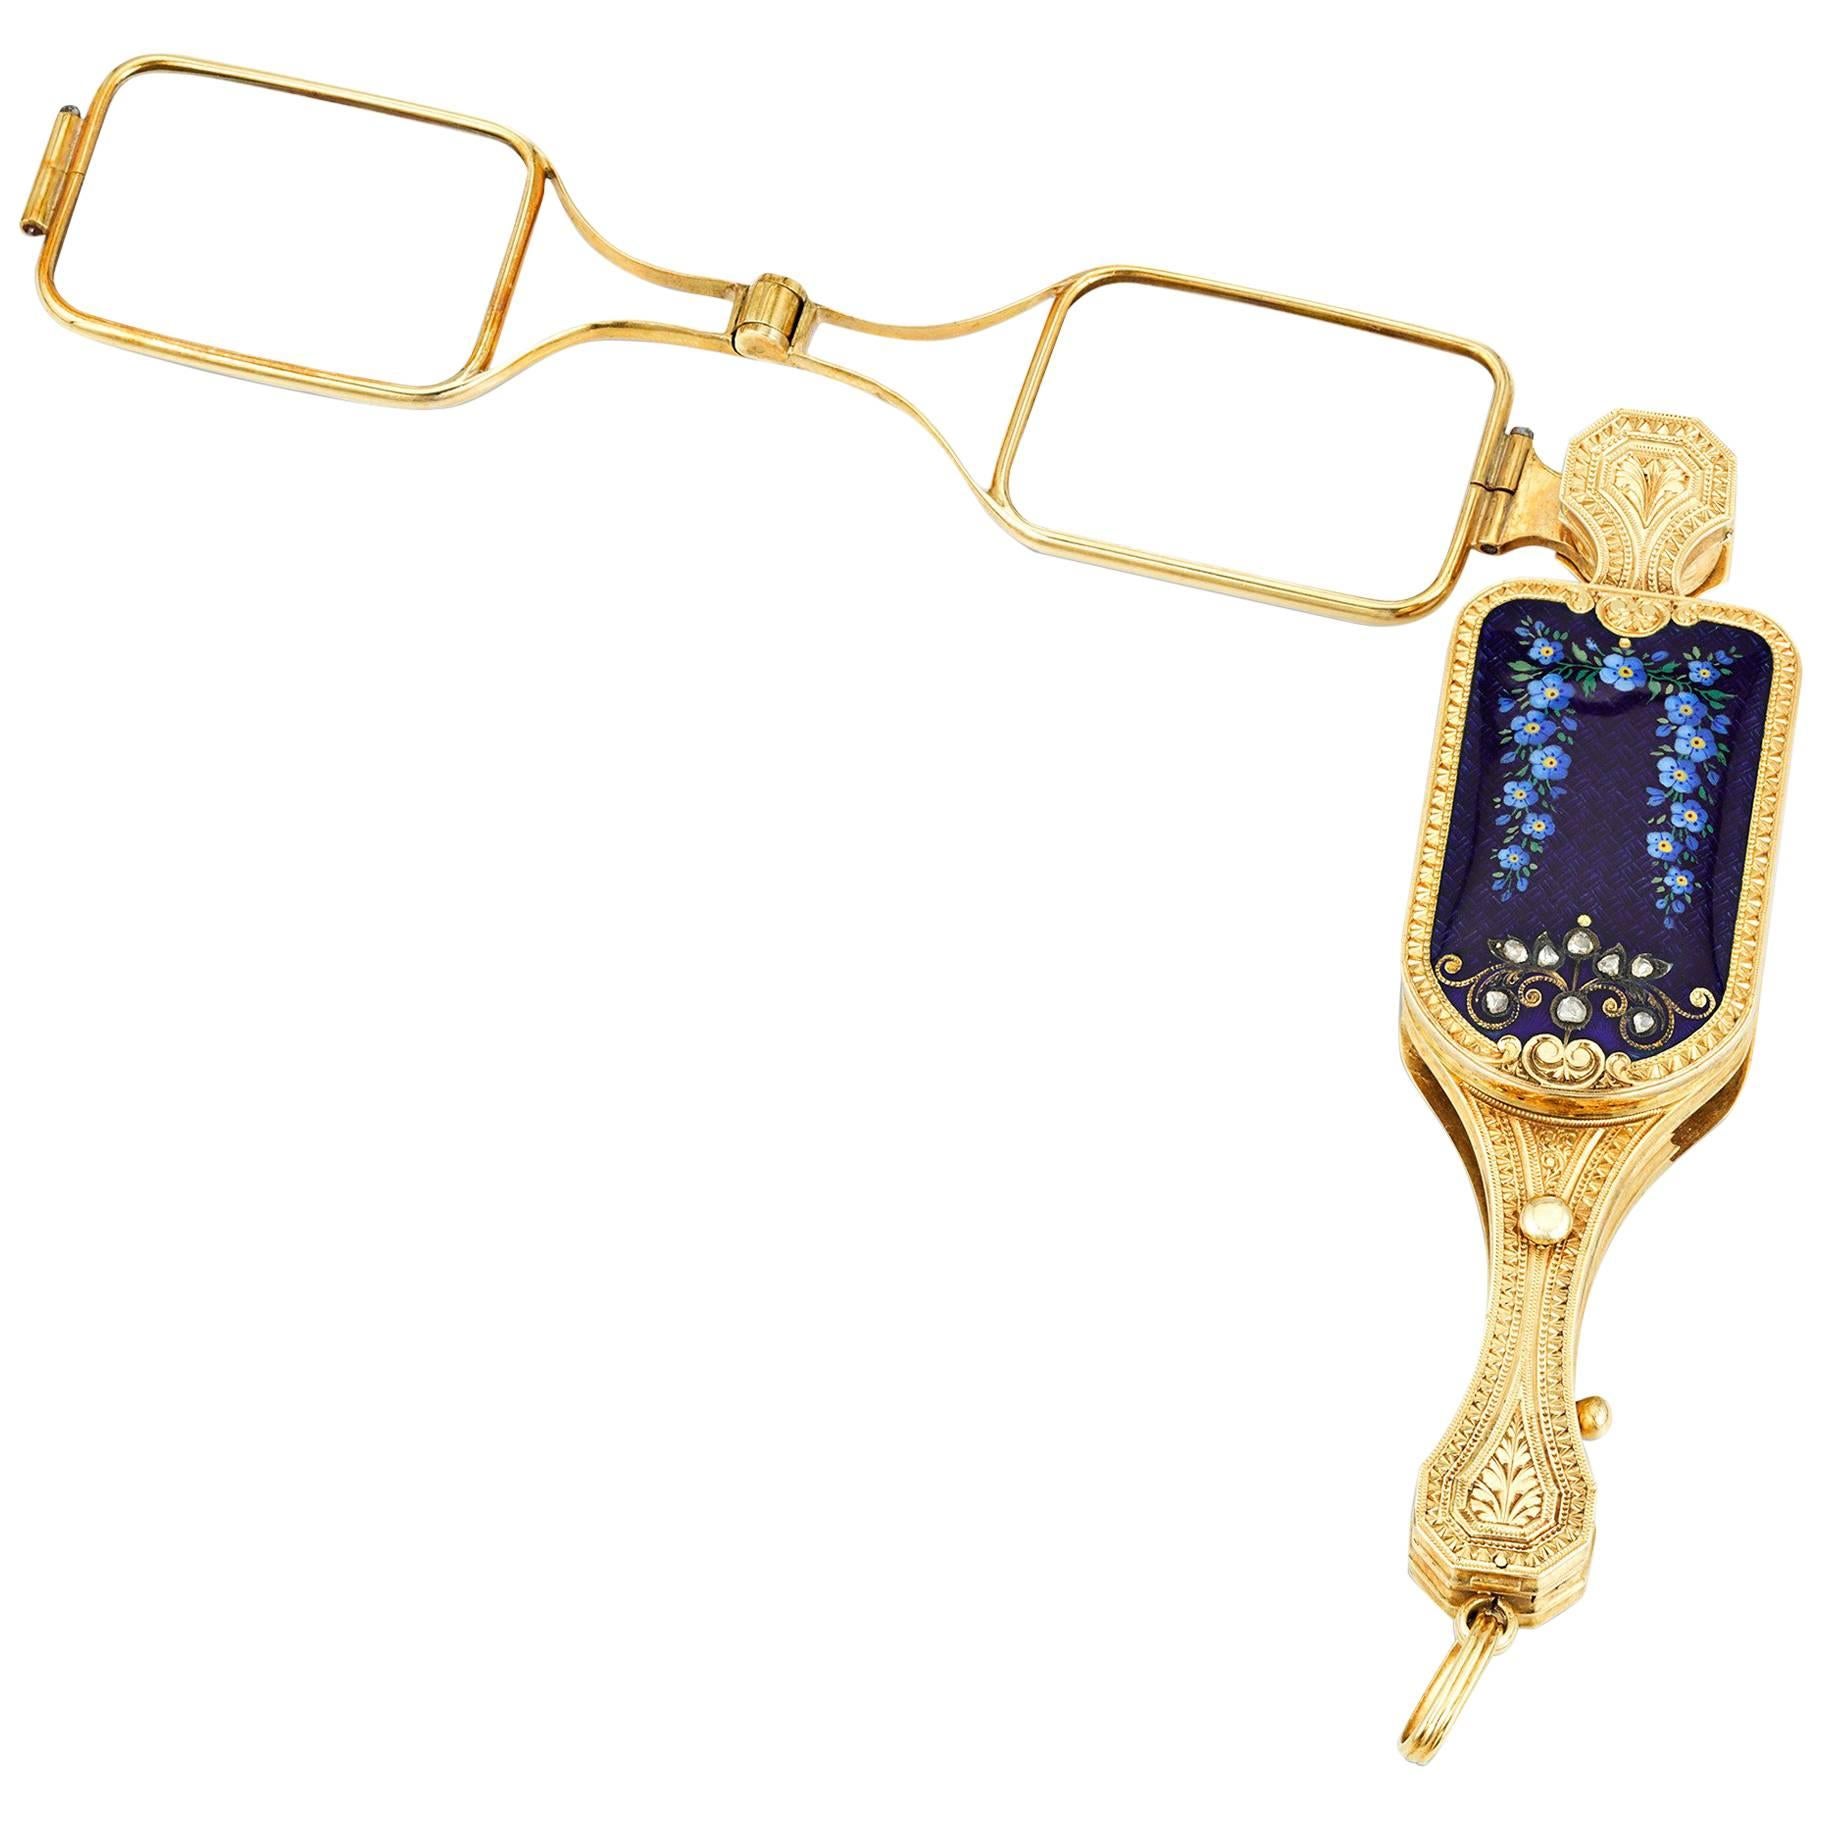 Gold and Enamel Lorgnette with Concealed Watch